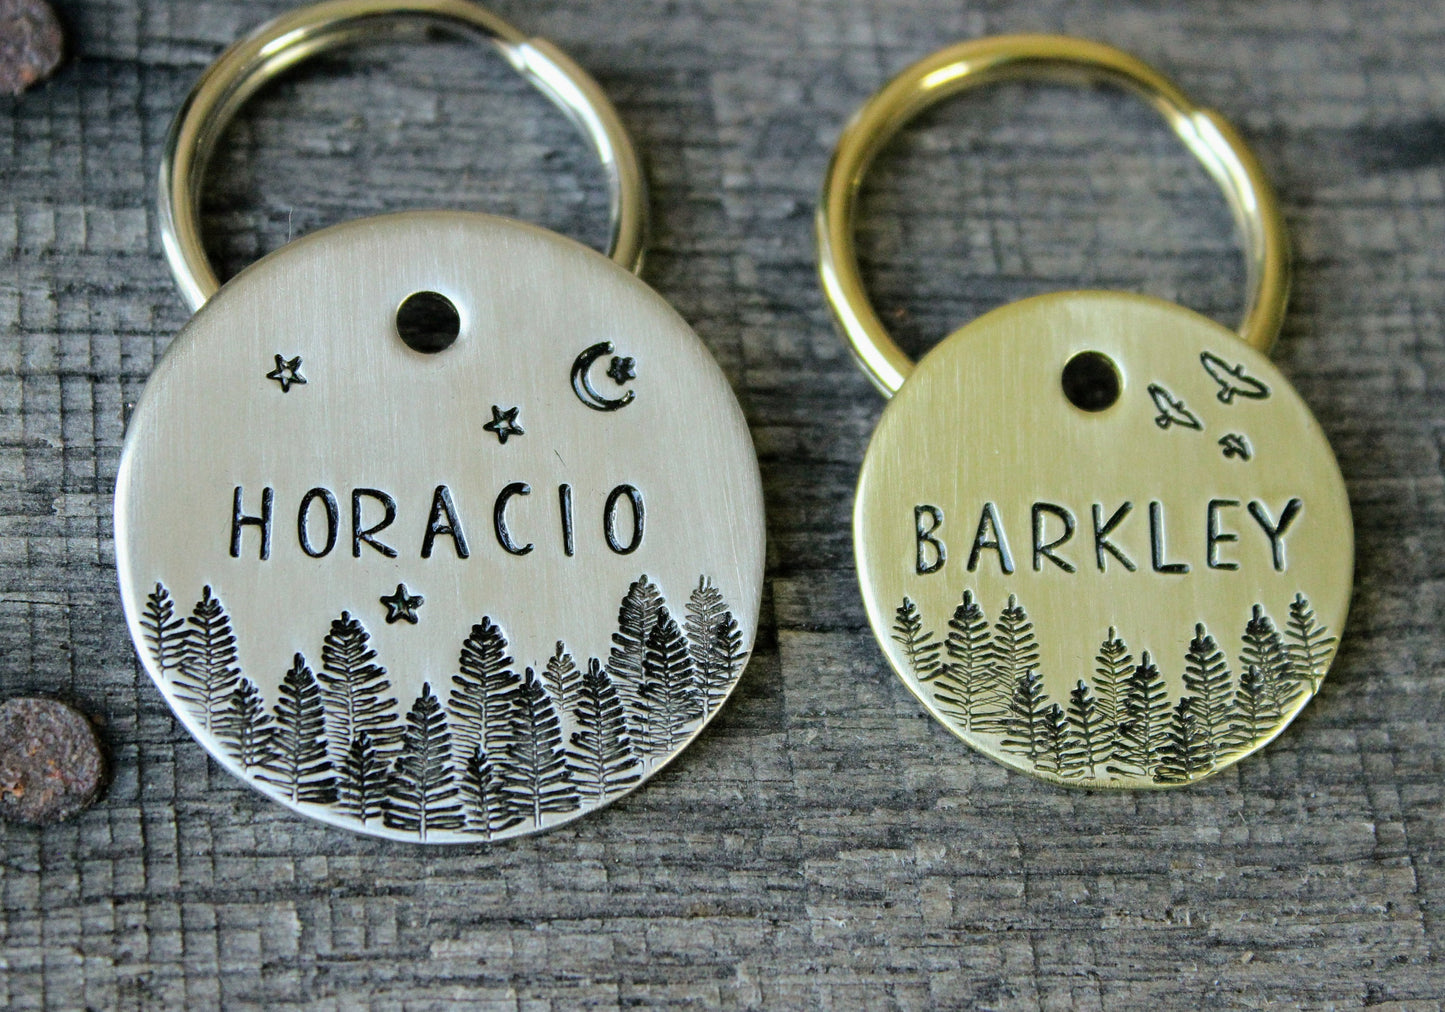 Personalized pet id tag - Evergreens